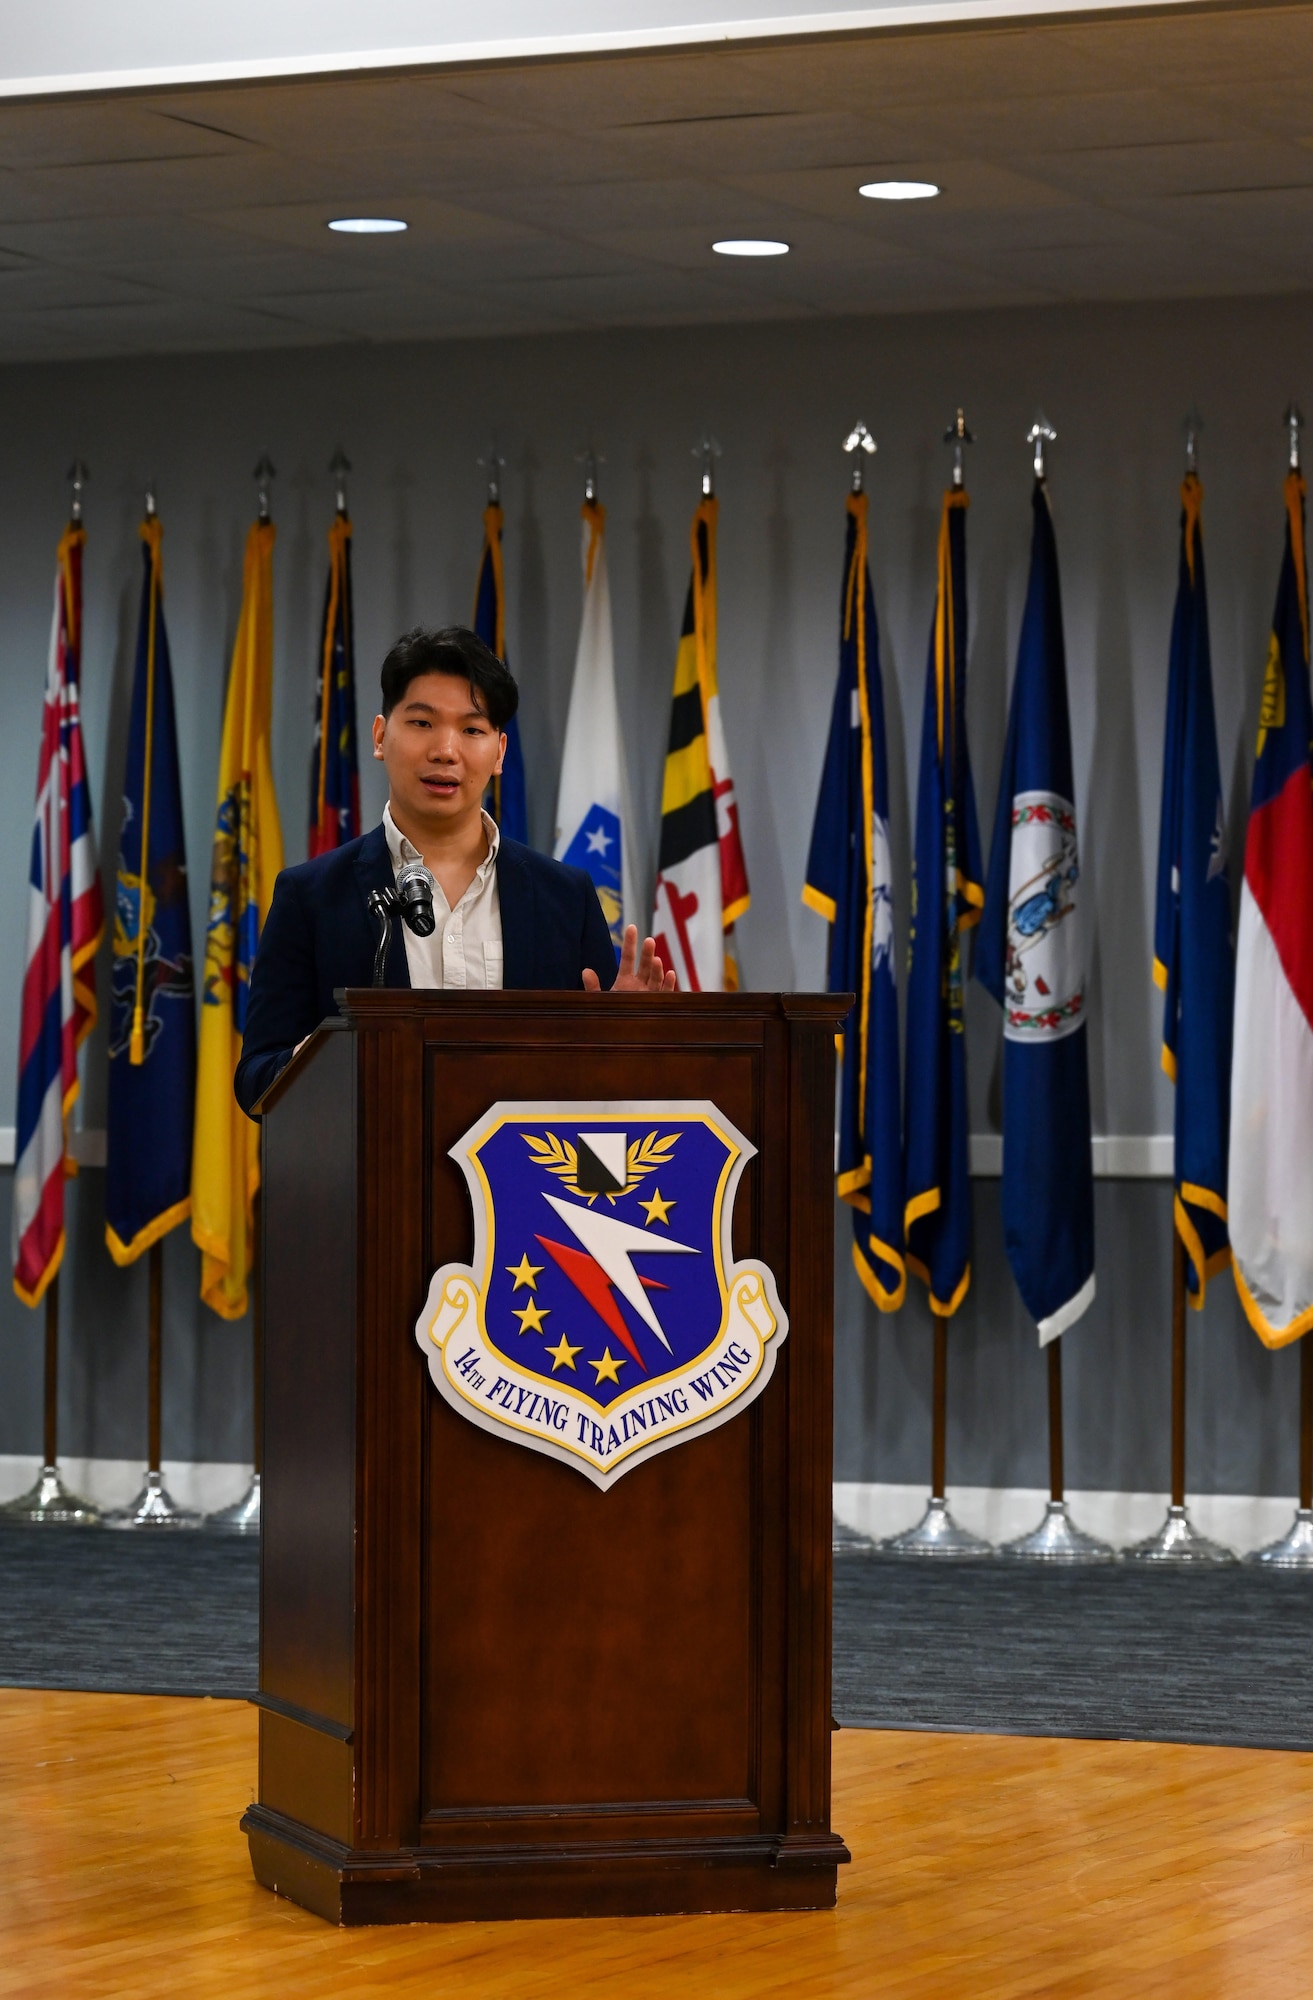 Dr. Anthony Pham, Mississippi University for Women professor of Science and Mathematics, speaks at the Asian American and Pacific Islander Heritage Month Observance on May 19, 2022, at Columbus Air Force Base, Miss. Pham is a native of the Mississippi Gulf Coast and a child of two Vietnamese immigrants. (U.S. Air Force photo by Senior Airman Davis Donaldson)